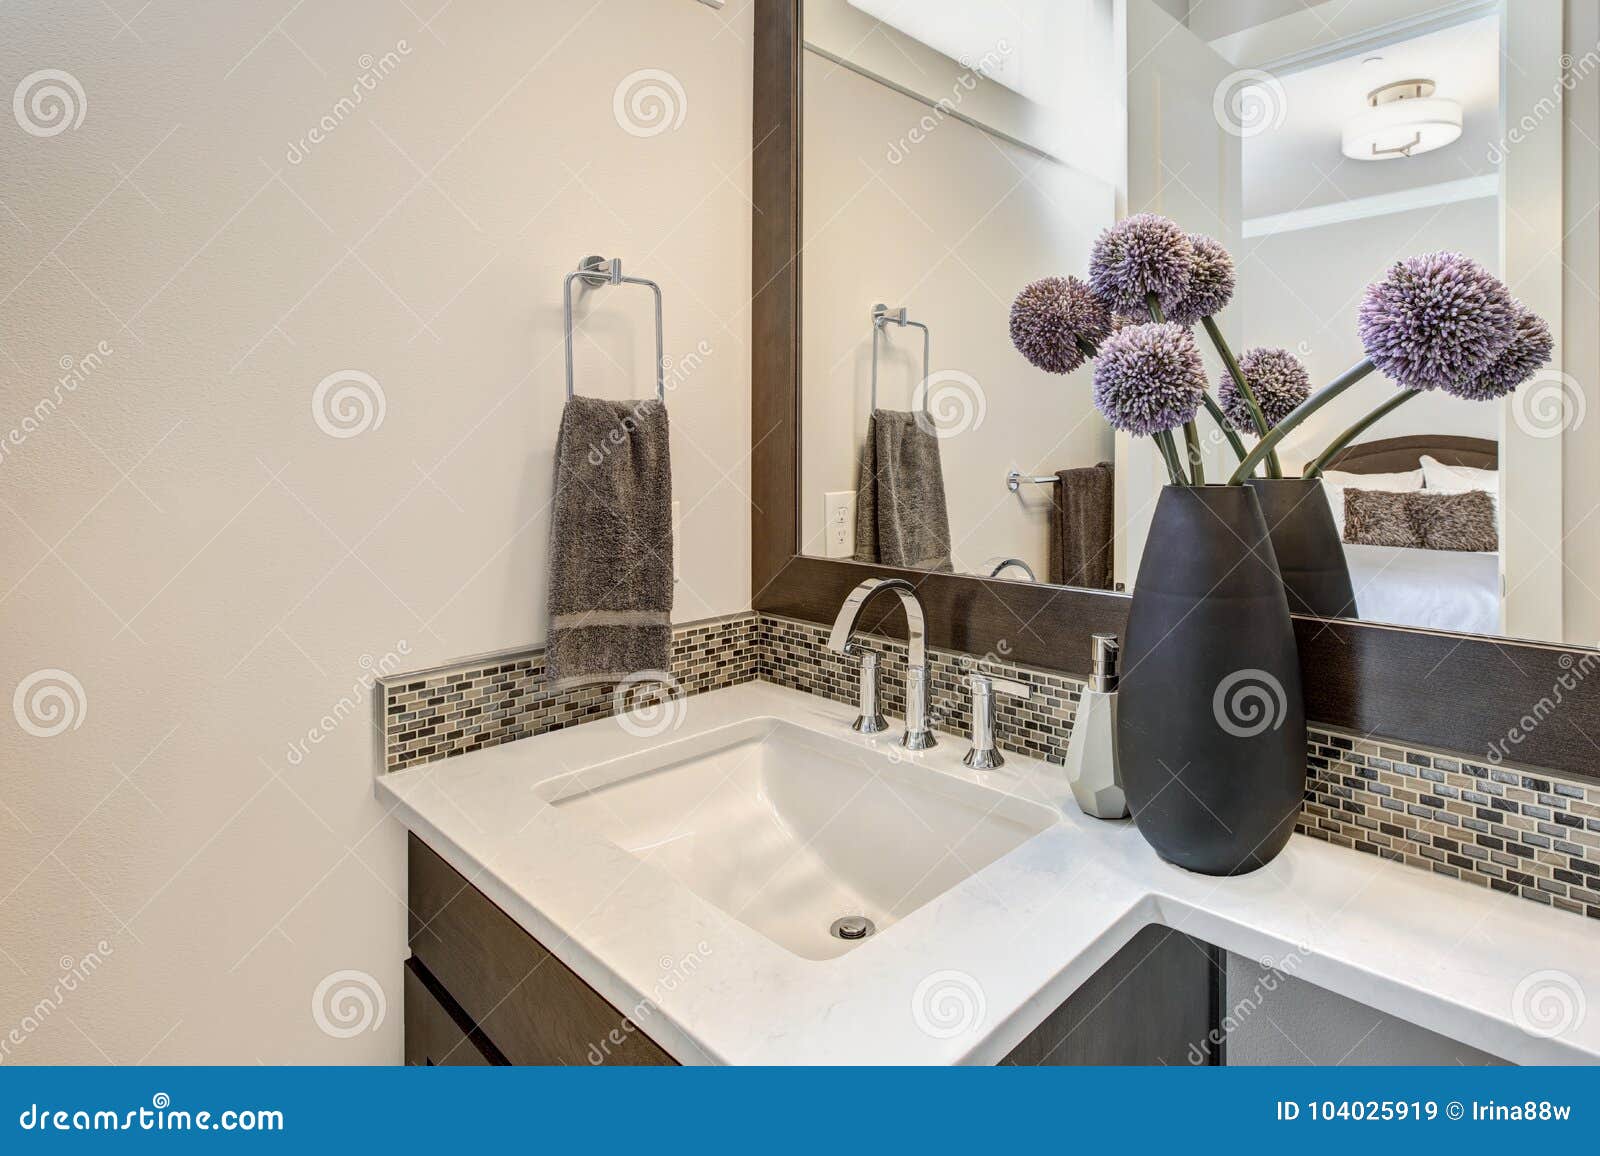 White And Brown Bathroom Interior With Vanity Cabinet Stock Image Image Of Building